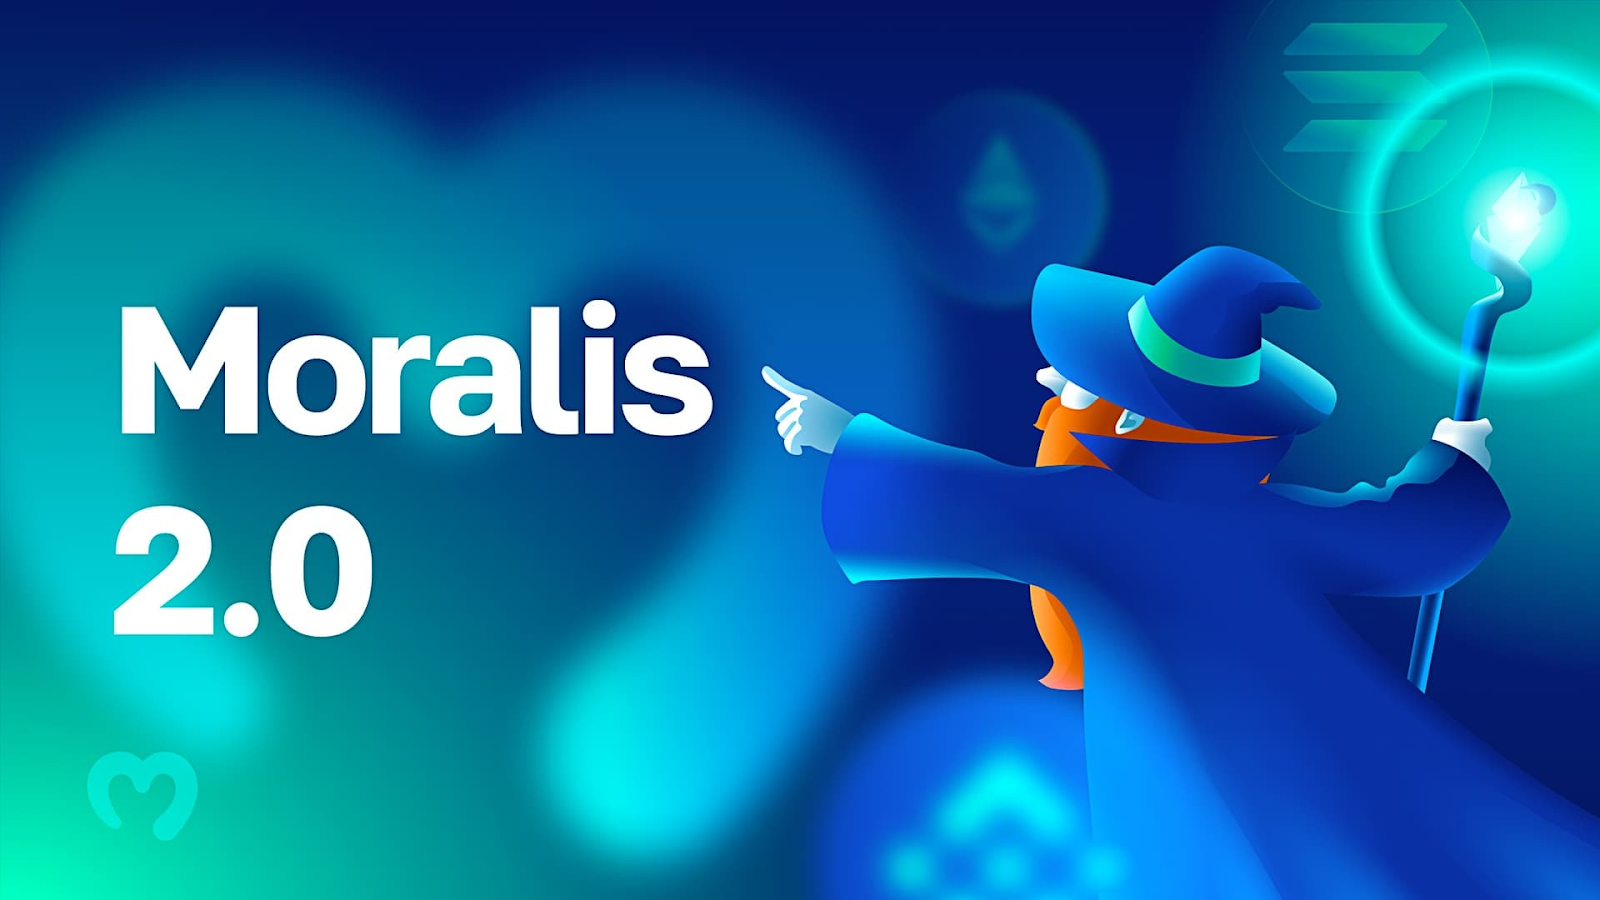 The best backend for Web3 is Moralis 2.0